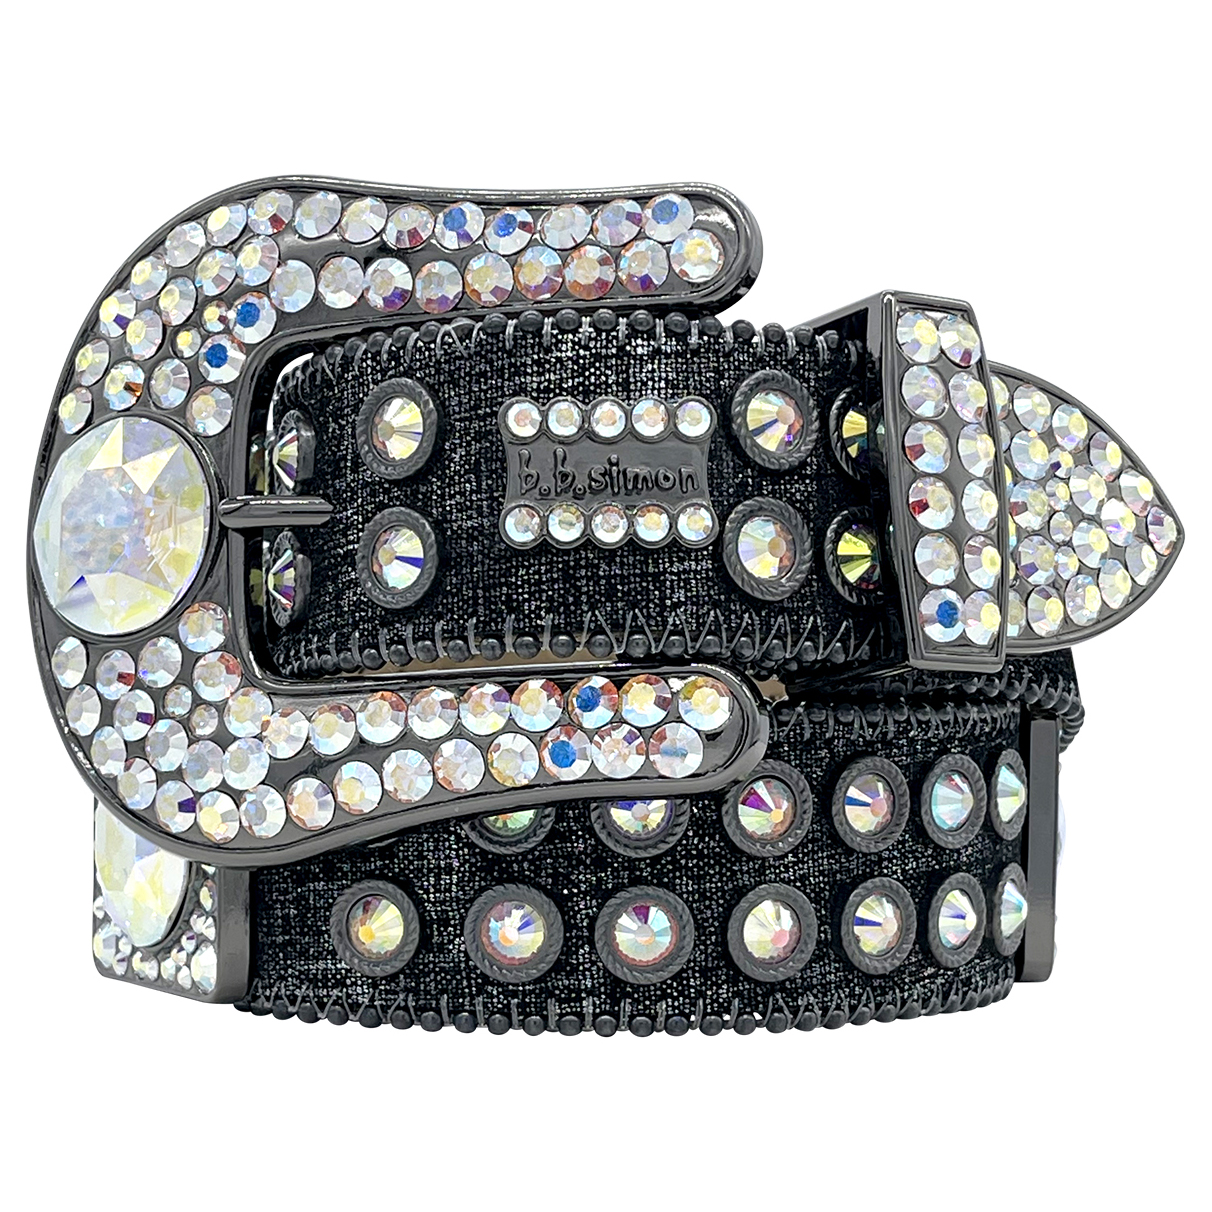 BBSIMON BELTS WHIT SWAROVSKI CRYSTAL AND ITALIAN LEATHER MADE IN USA